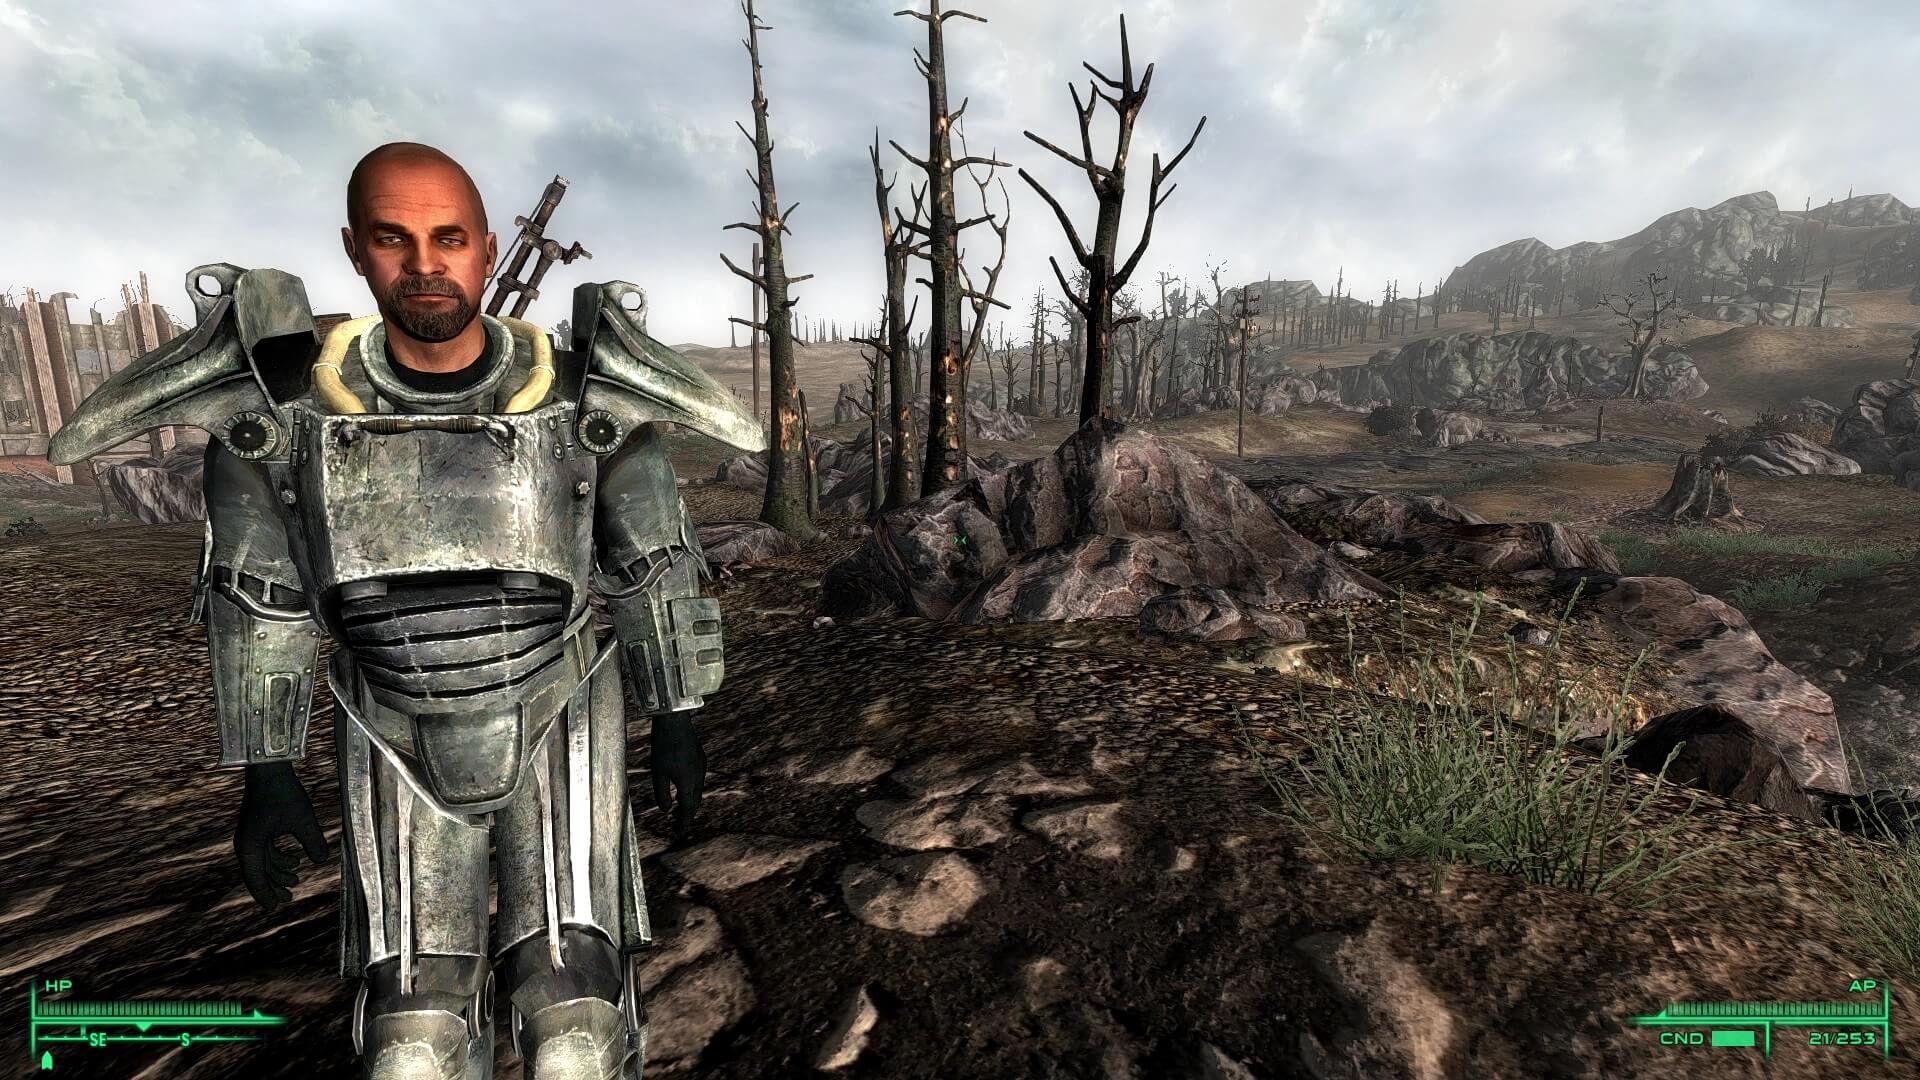 Fallout 3 texture mods not working poohistory